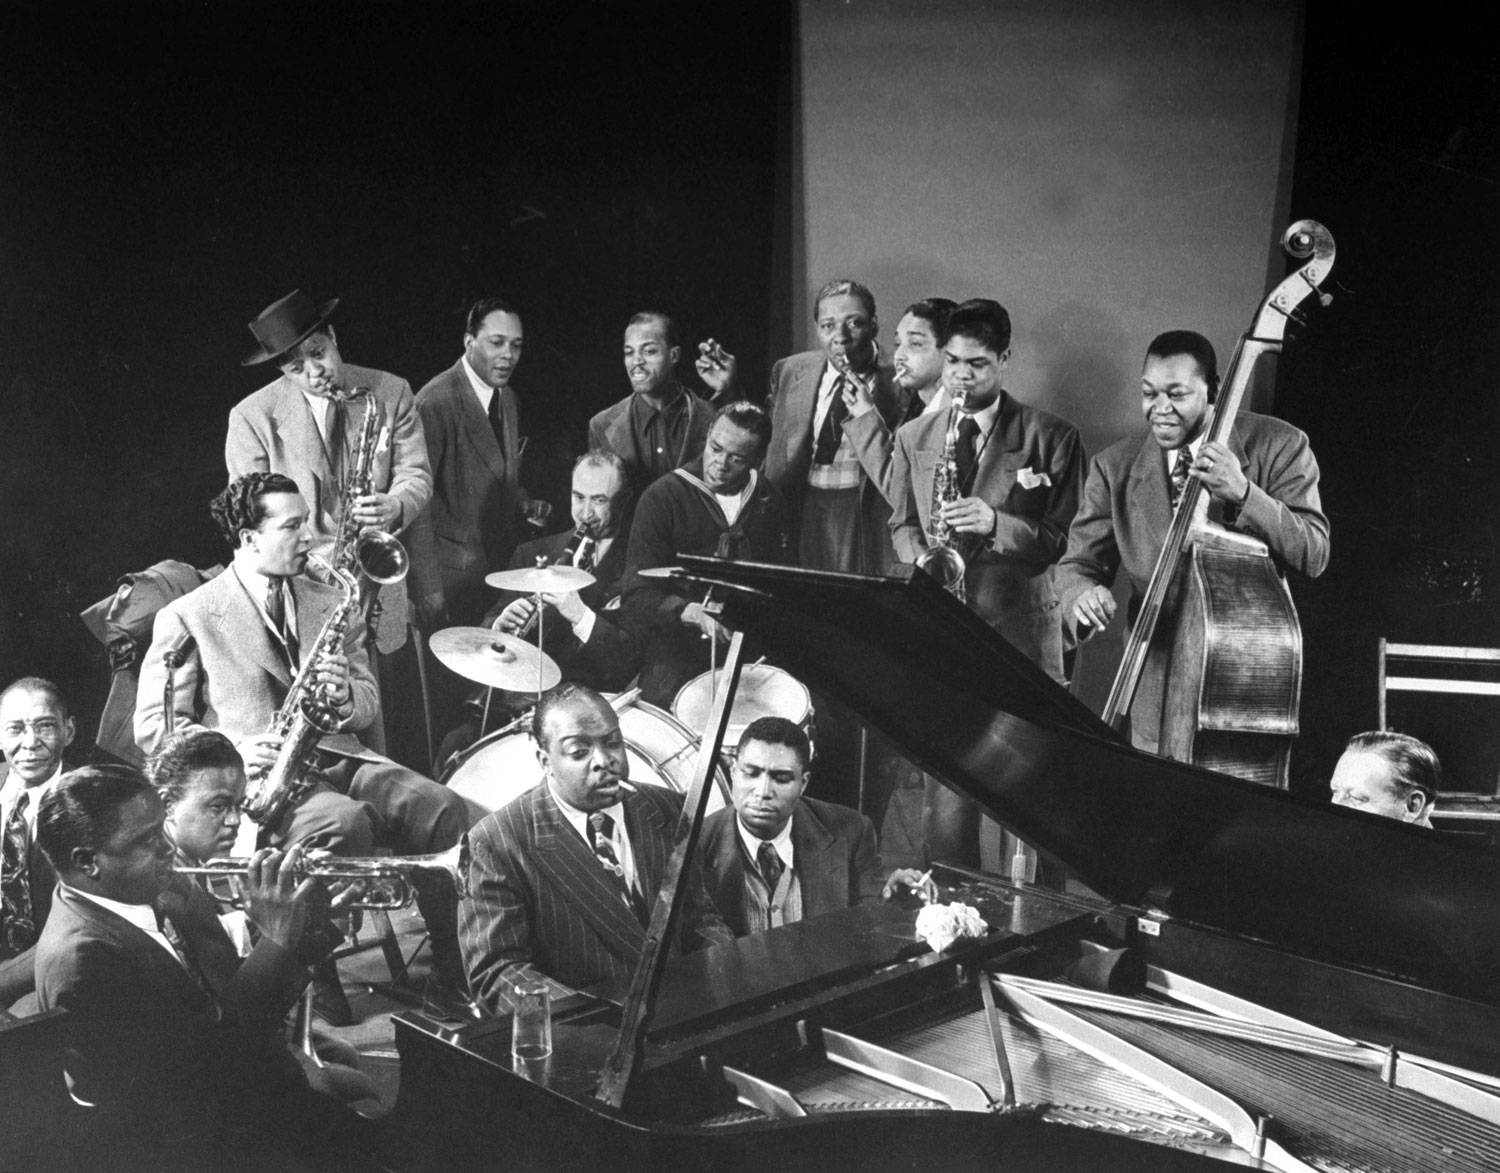 Jazz jam session, including Lester Young (standing, in hat) on saxophone and Count Basie at the piano, 1943.